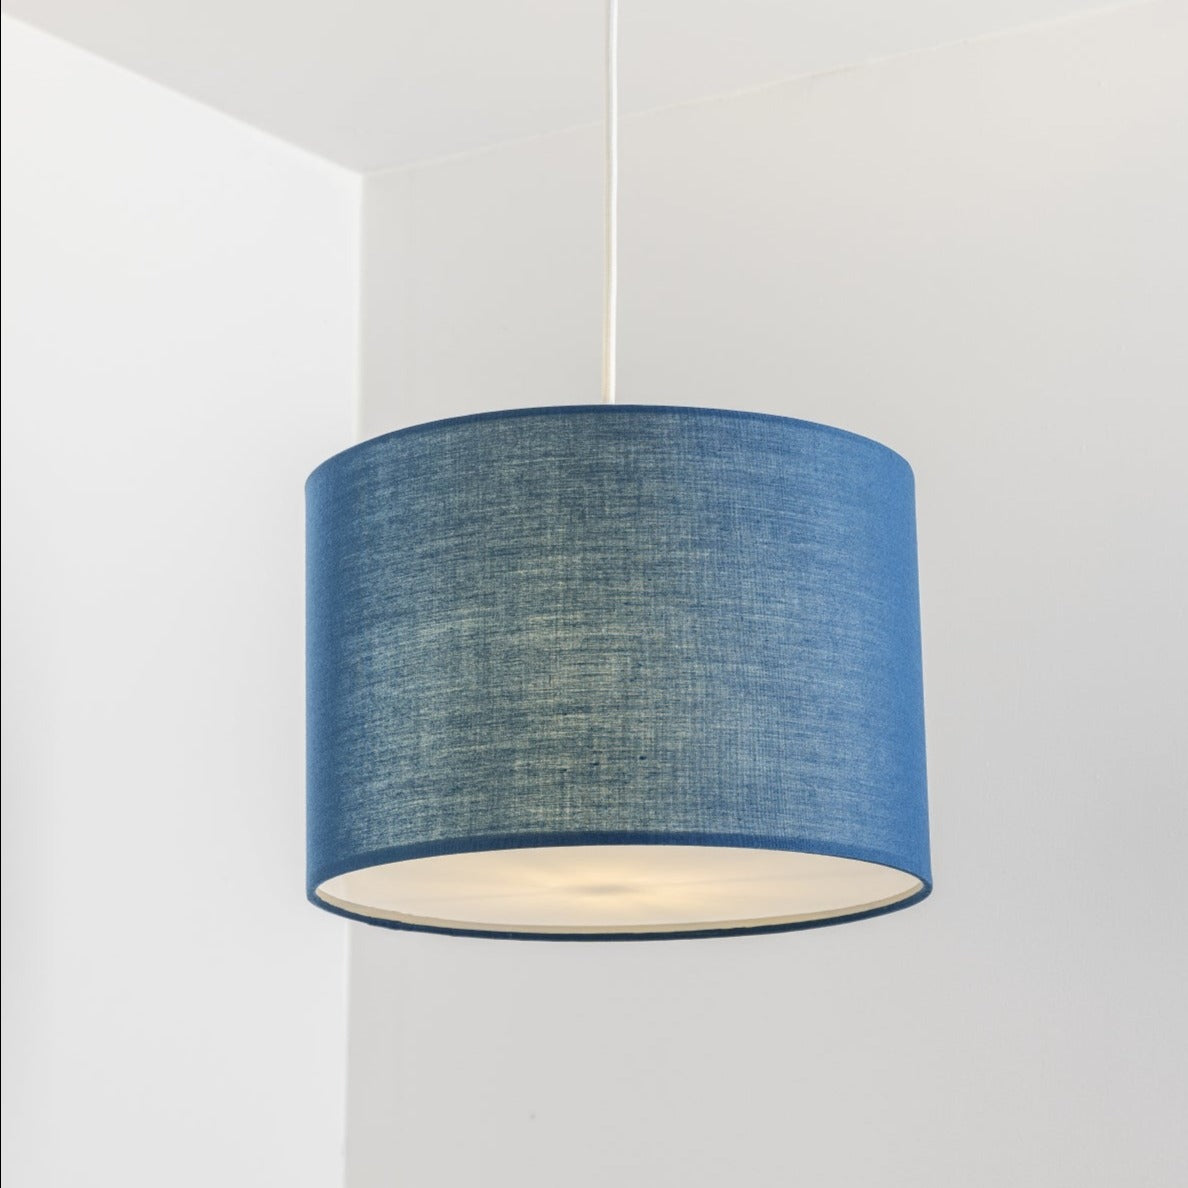 The Lucia is a modern cylinder drum shaped lamp shade in a luxury cotton finish and white opal diffuser. This fantastic shade can double up as either a ceiling pendant light shade or table lampshade. Easily fits to your standard ceiling light socket - no wiring required.